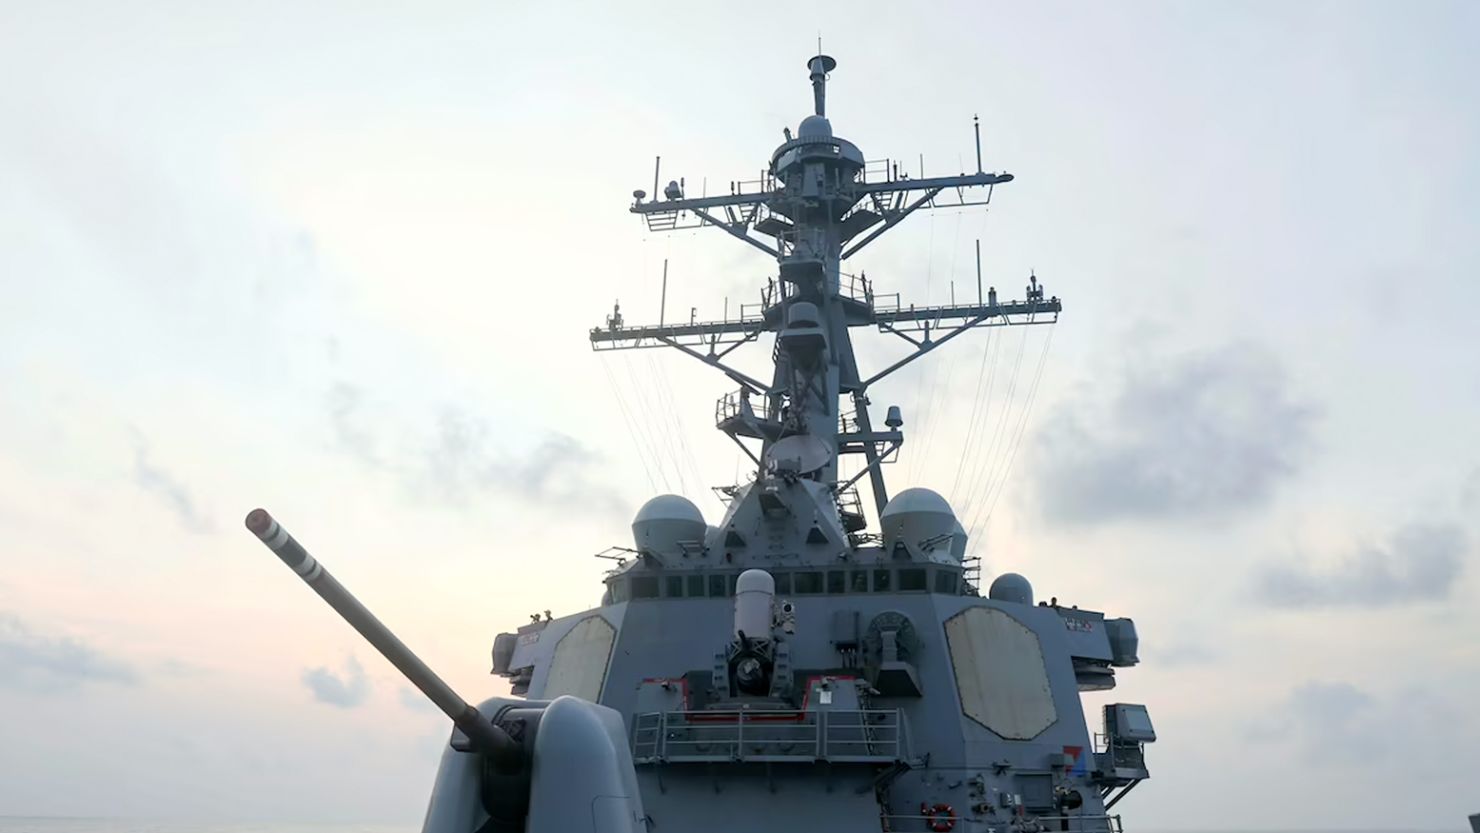 The guided-missile destroyer USS Milius on Monday "asserted navigational rights and freedoms in the South China Sea near the Spratly Islands, consistent with international law," the US Navy said in a statement.